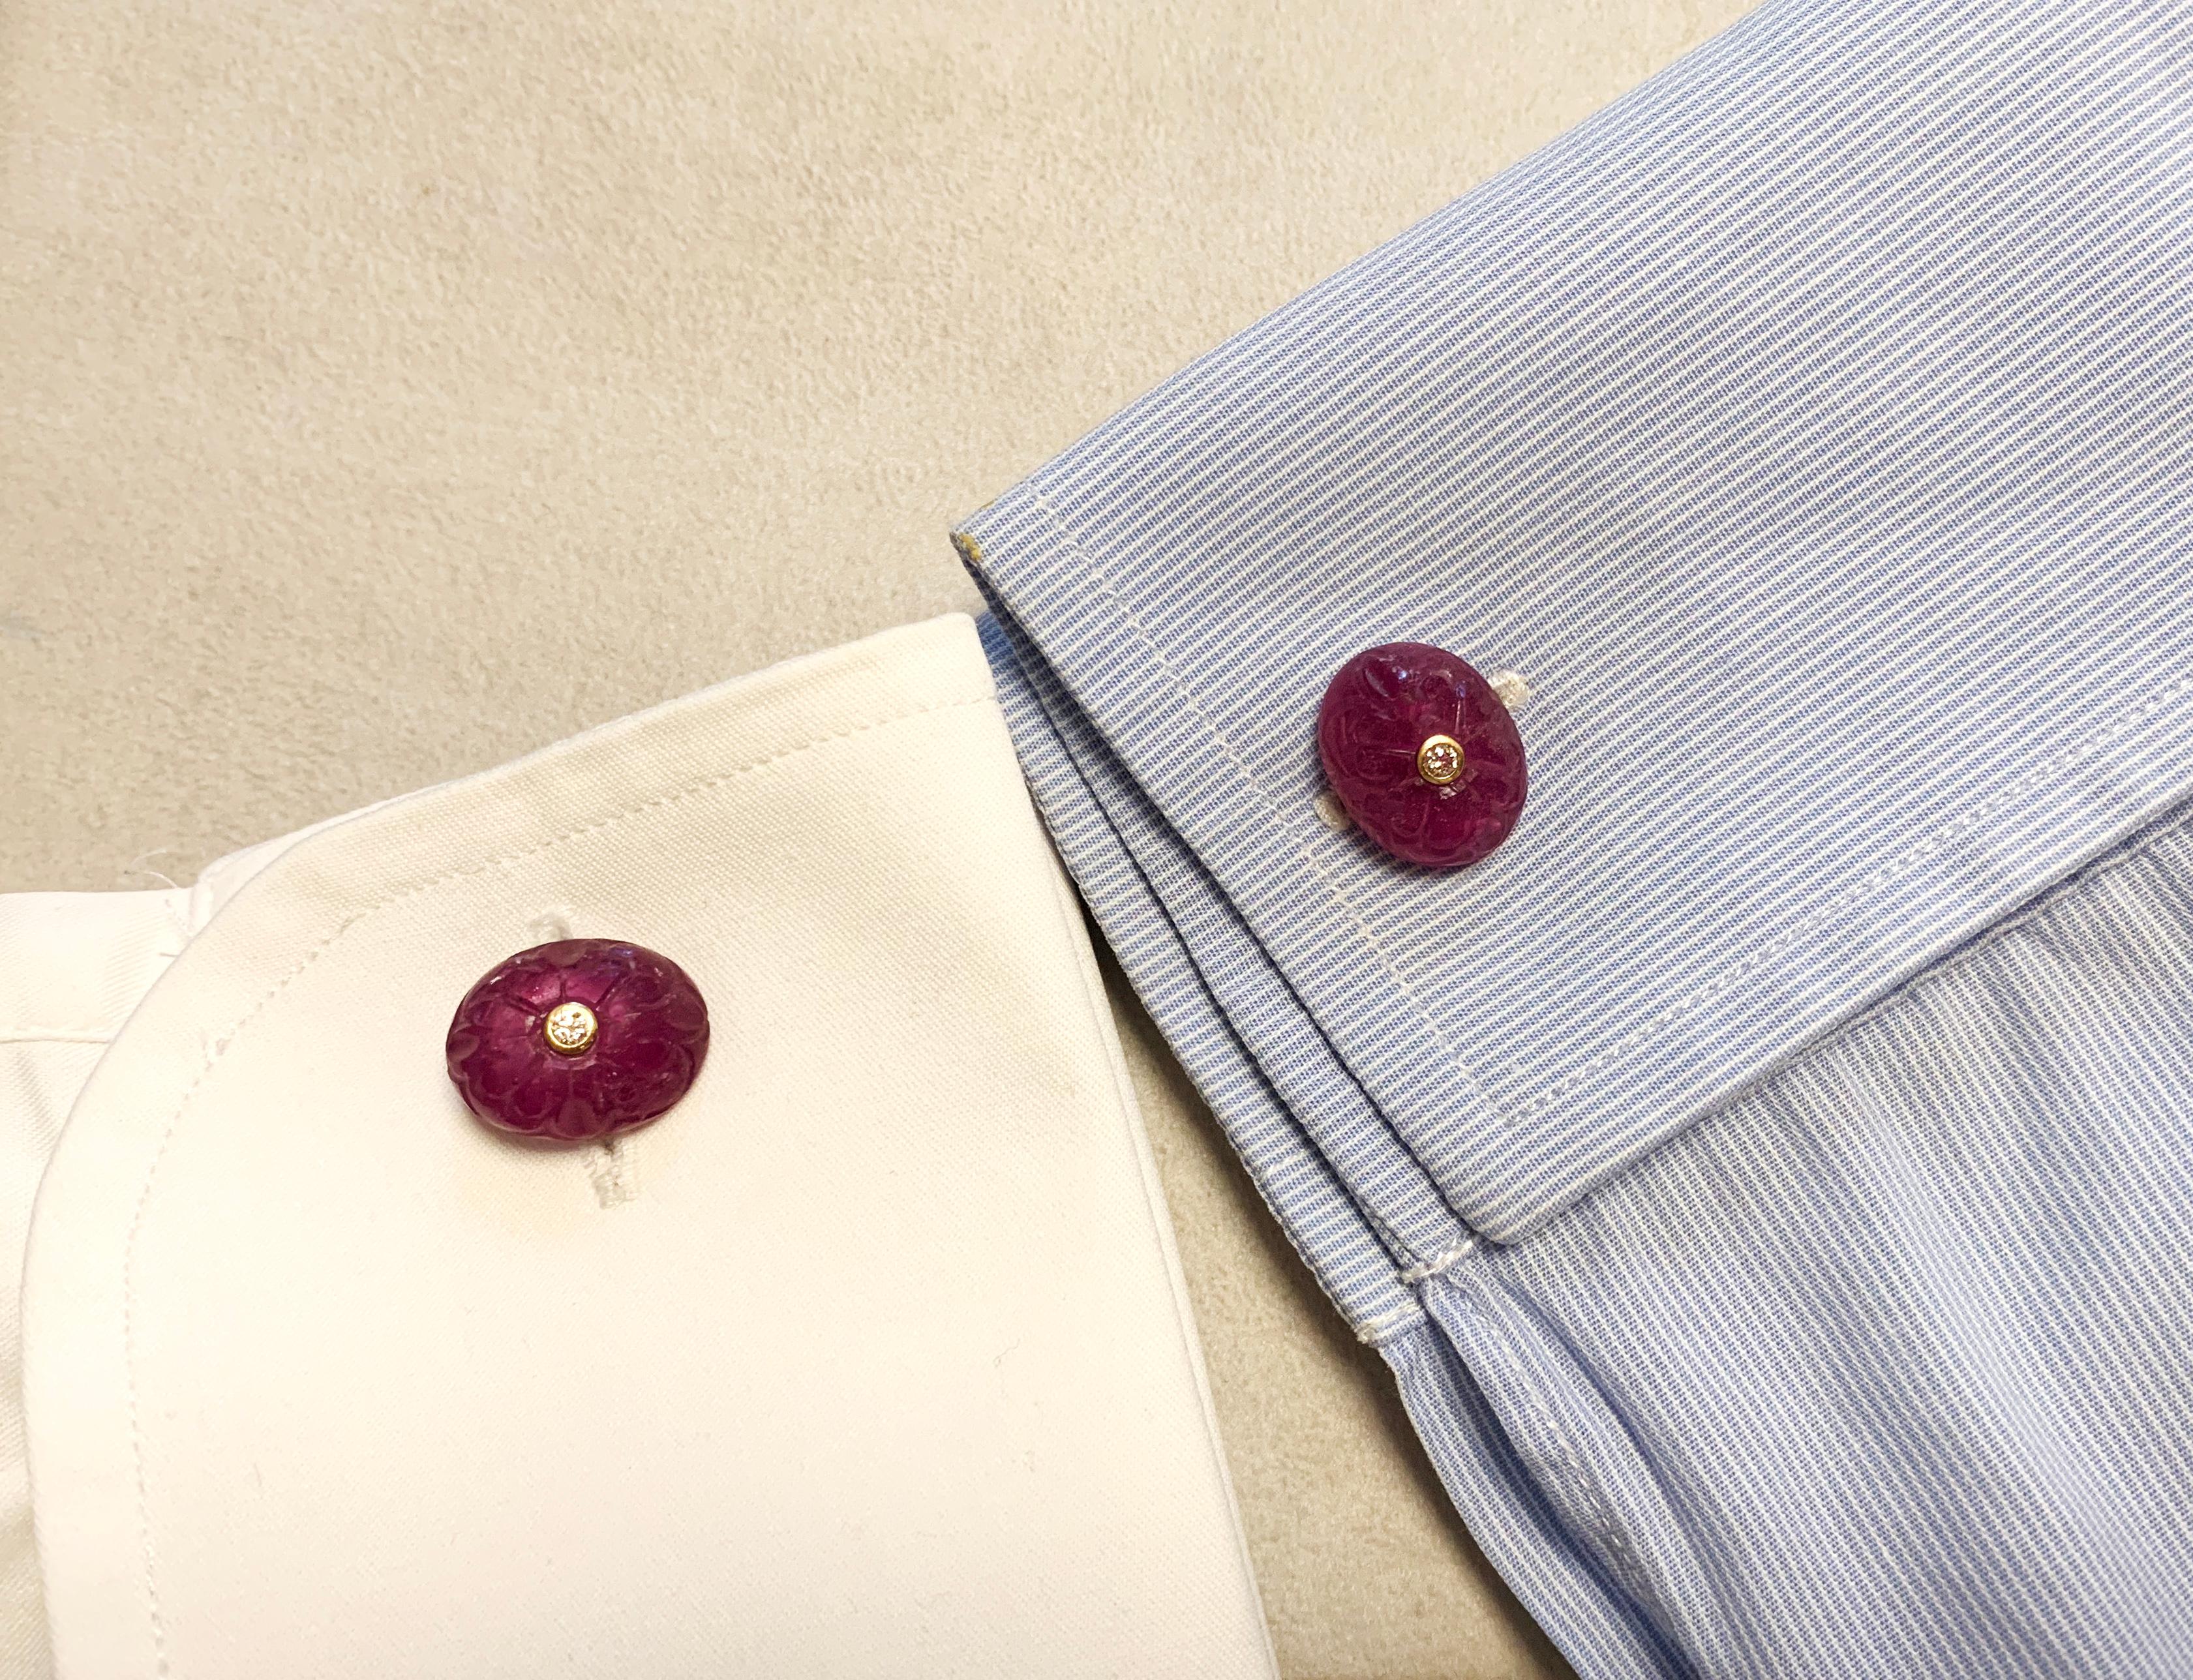 18 Karat Yellow Gold Double Oval Cufflinks in Sapphire Ruby and Diamonds 4